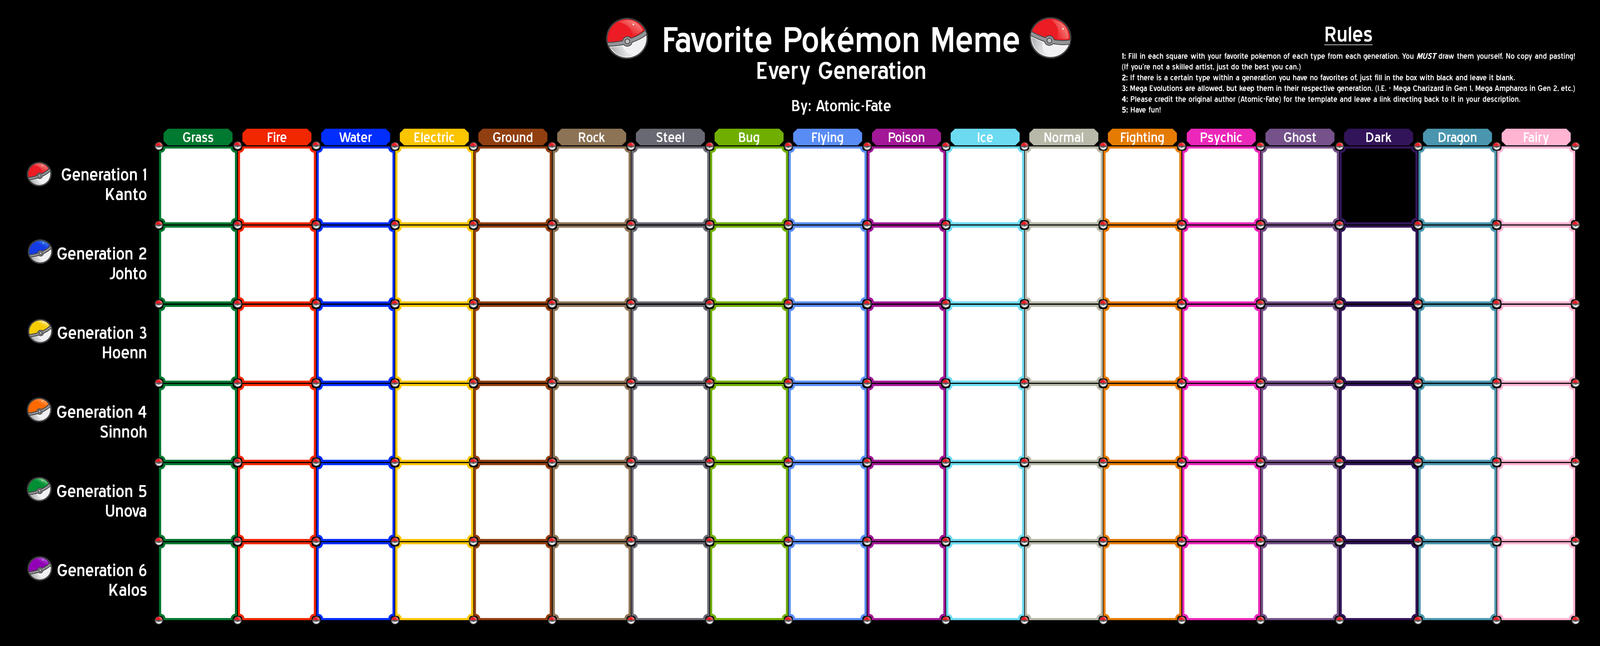 Favorite Pokemon Meme Every Generation (Template) by AtomicFate on